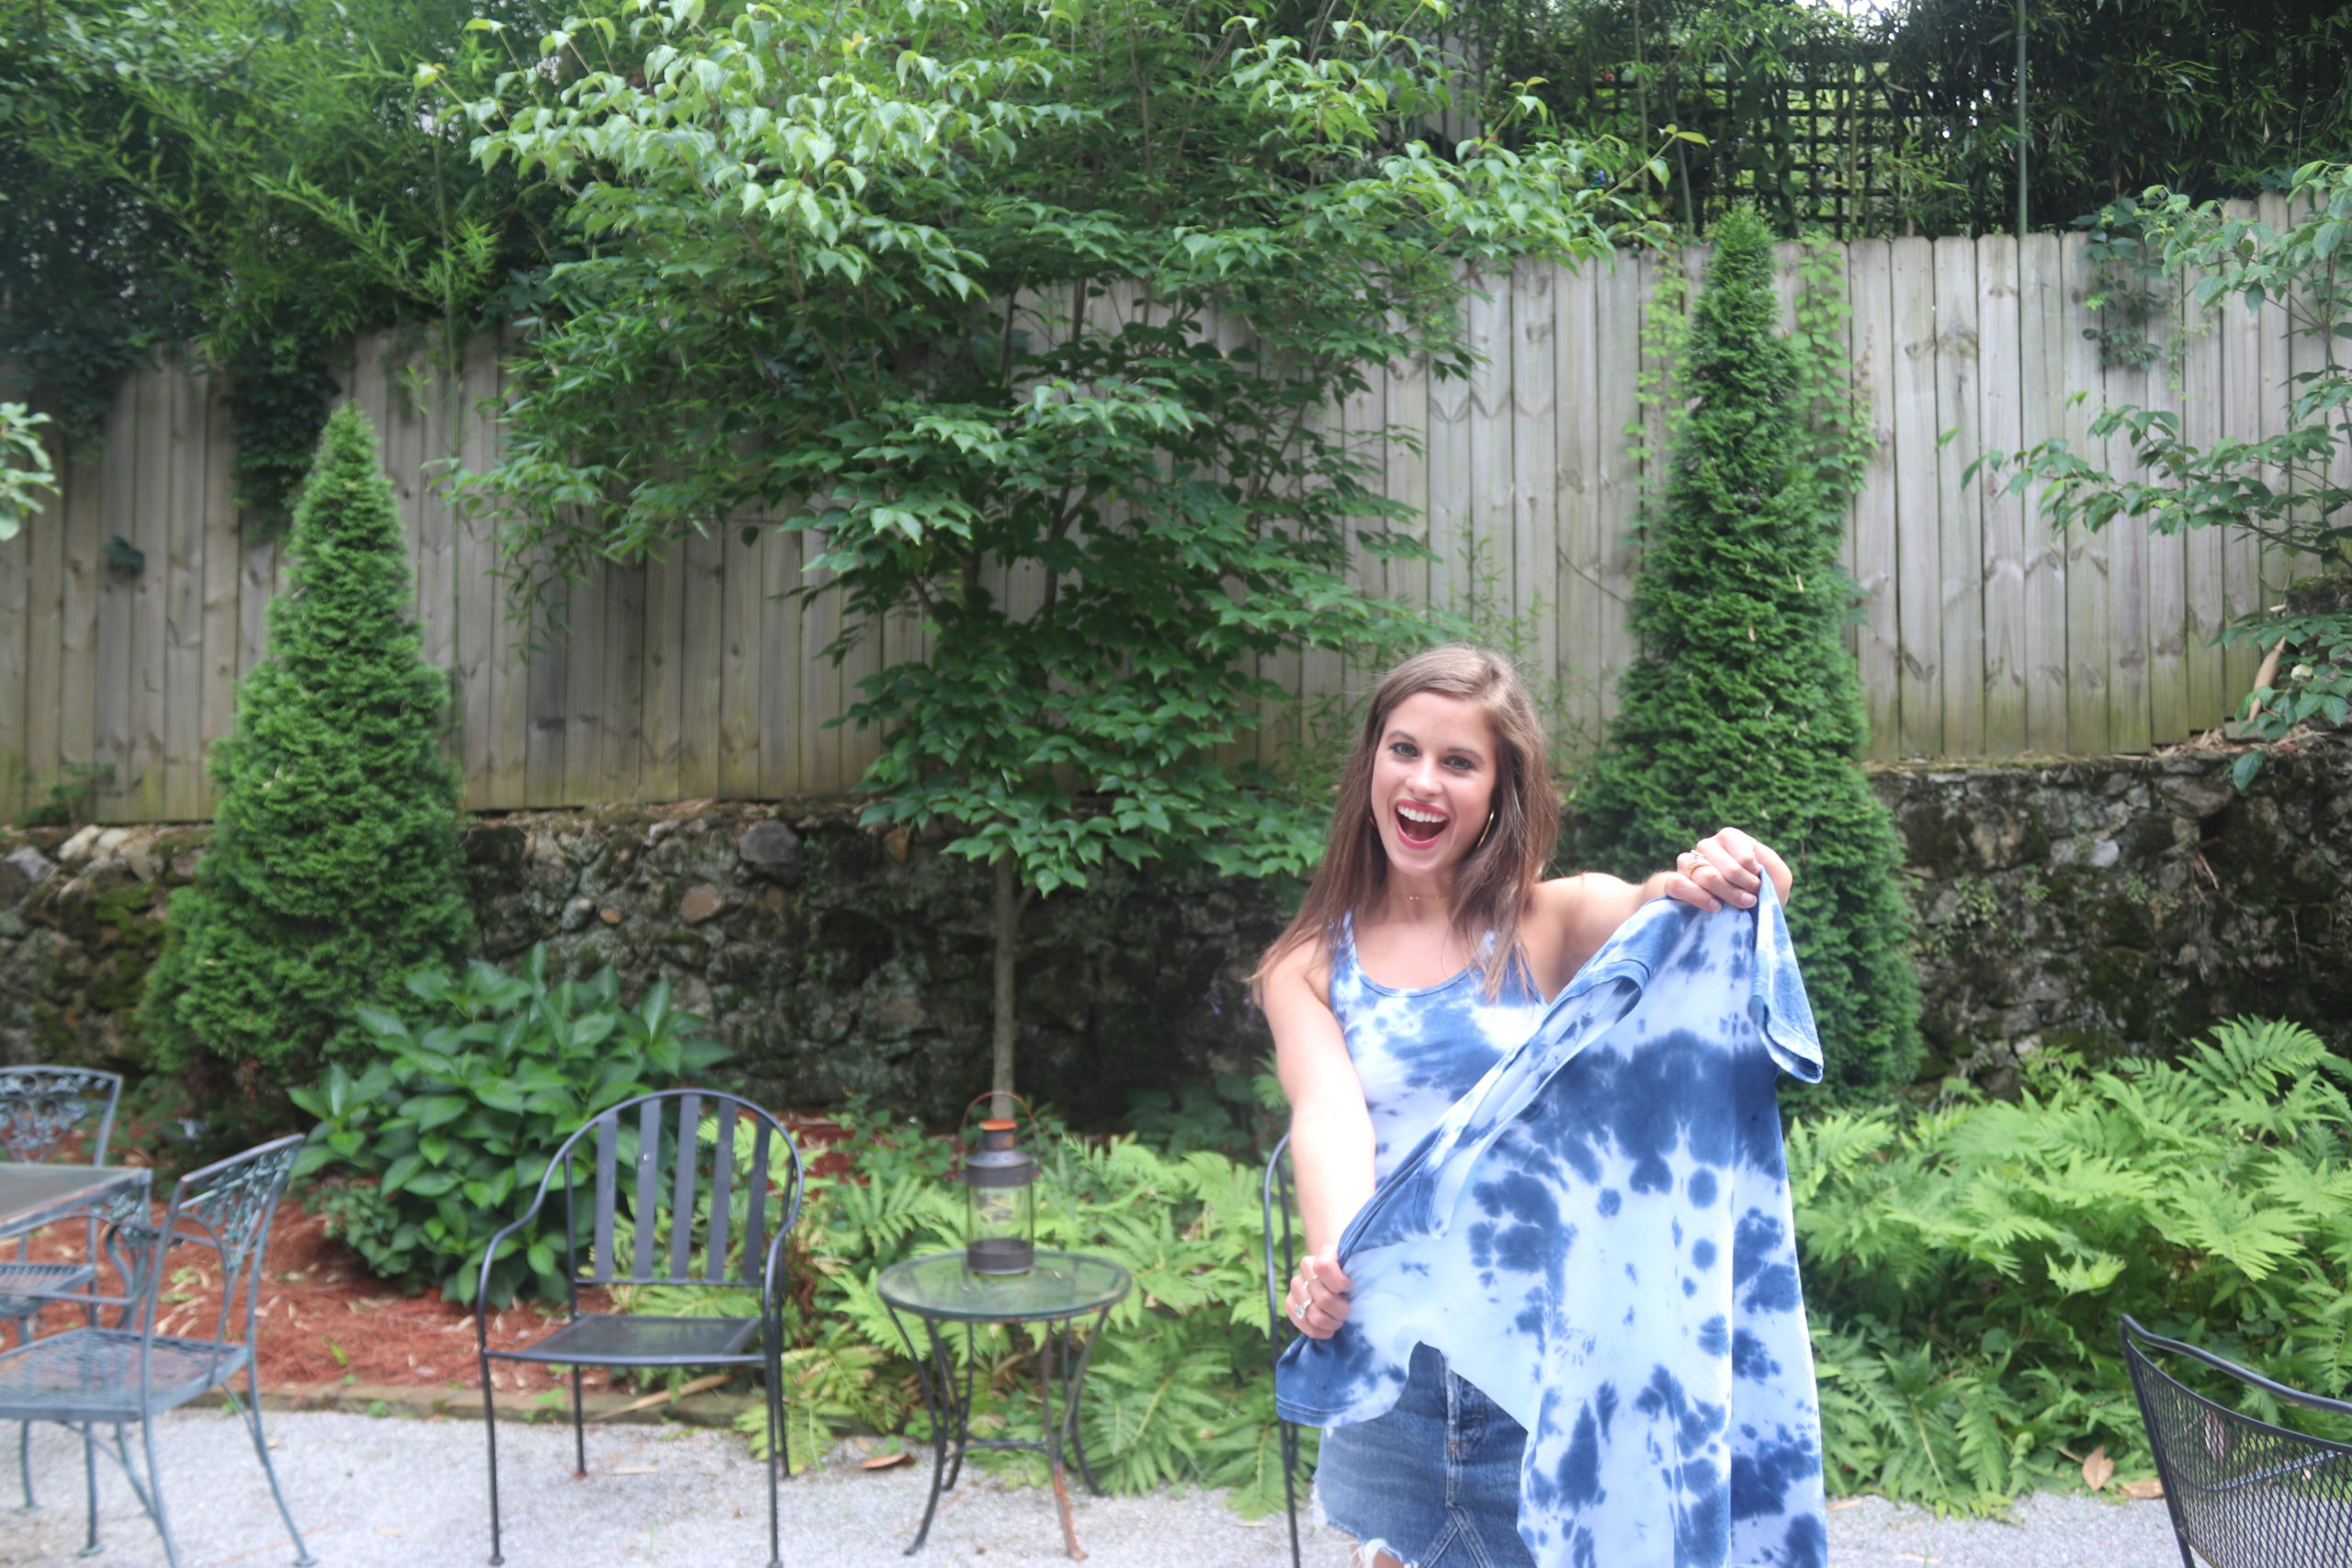 Girl standing outside with brown hair wearing a tie-dye tank & holding a tie dye t-shirt